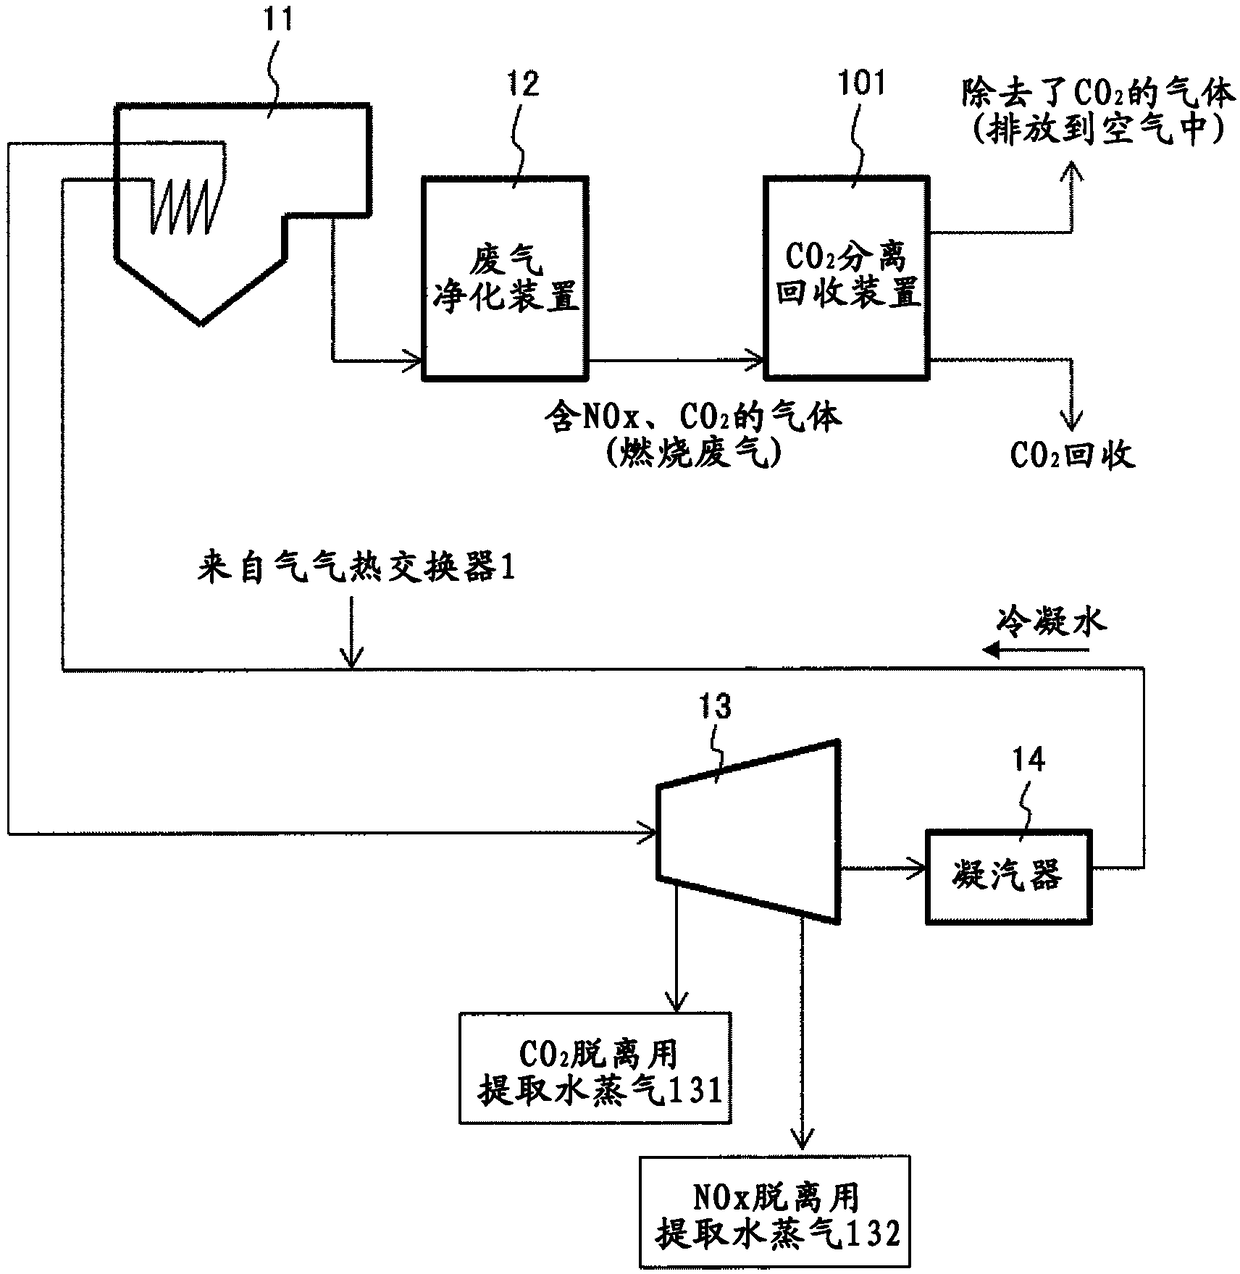 Carbon dioxide separation/recovery device, combustion system using same, thermal power generation system using same, and method for separating and recovering carbon dioxide